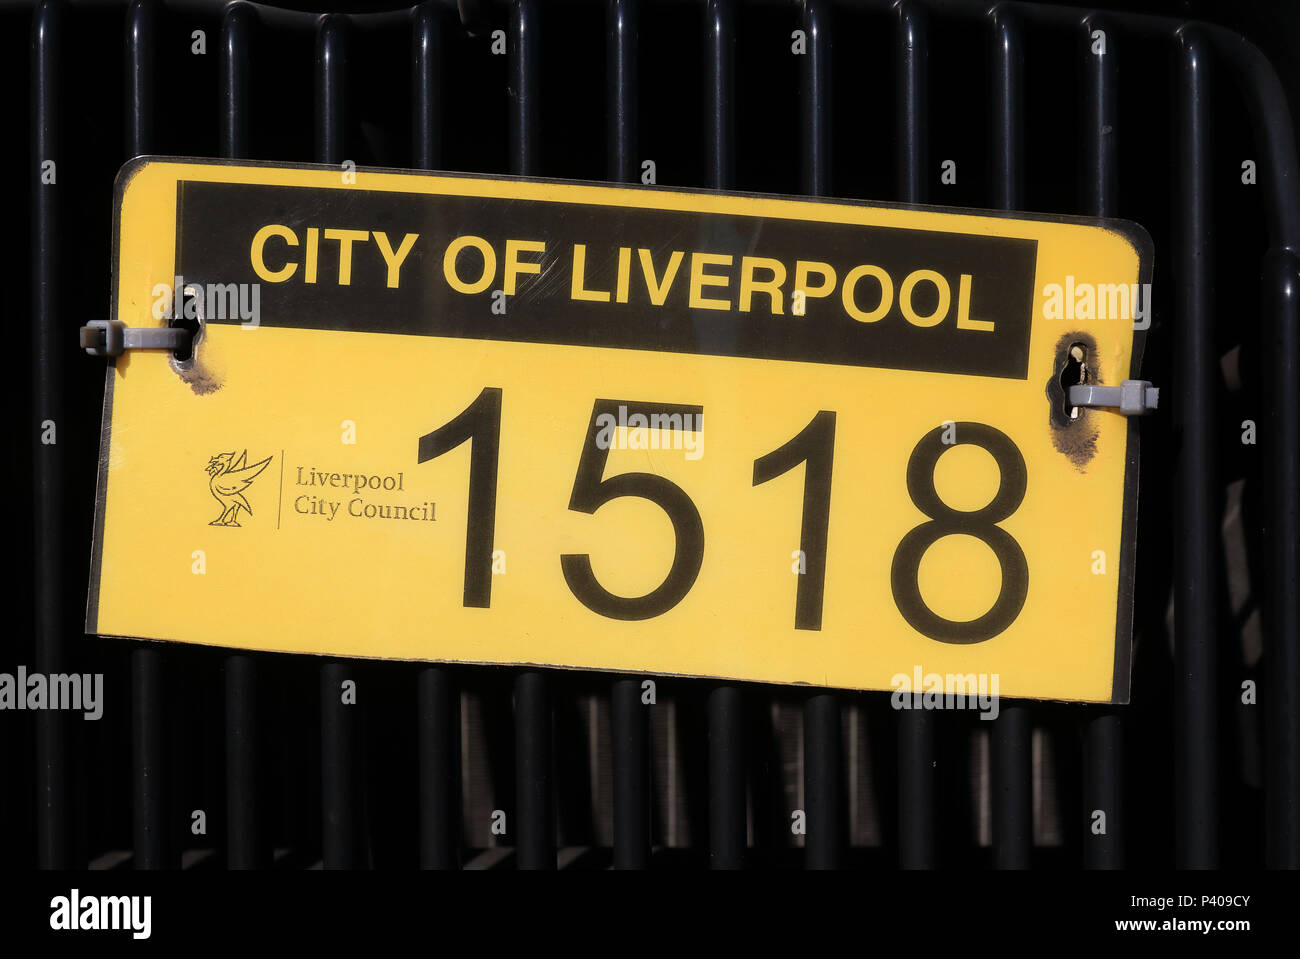 Liverpool taxi cab licence plate, in Merseyside, NW England, UK Stock Photo